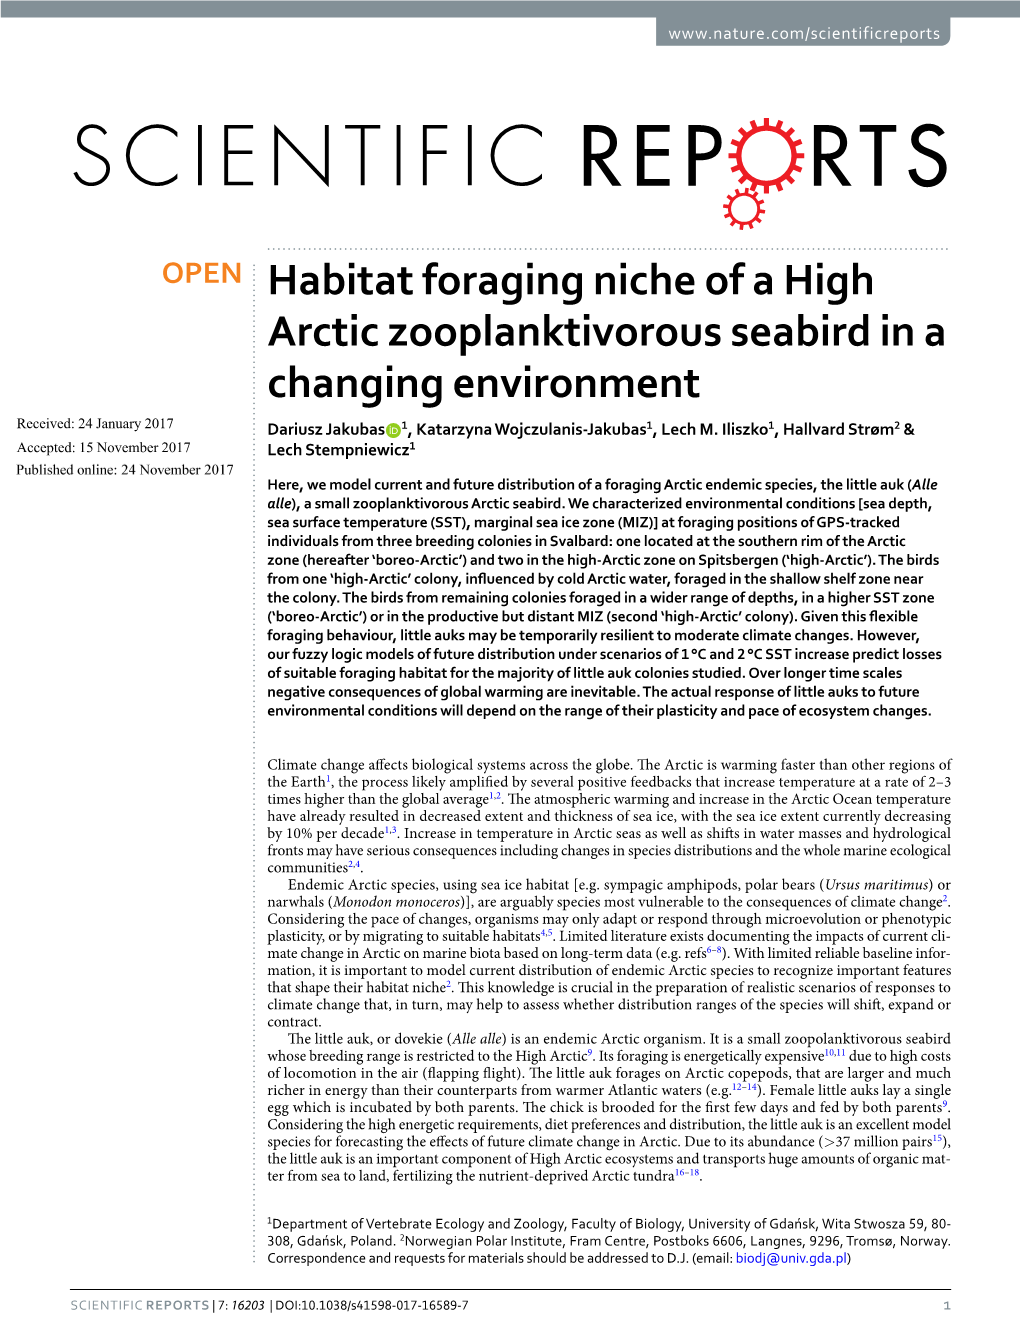 Habitat Foraging Niche of a High Arctic Zooplanktivorous Seabird in A